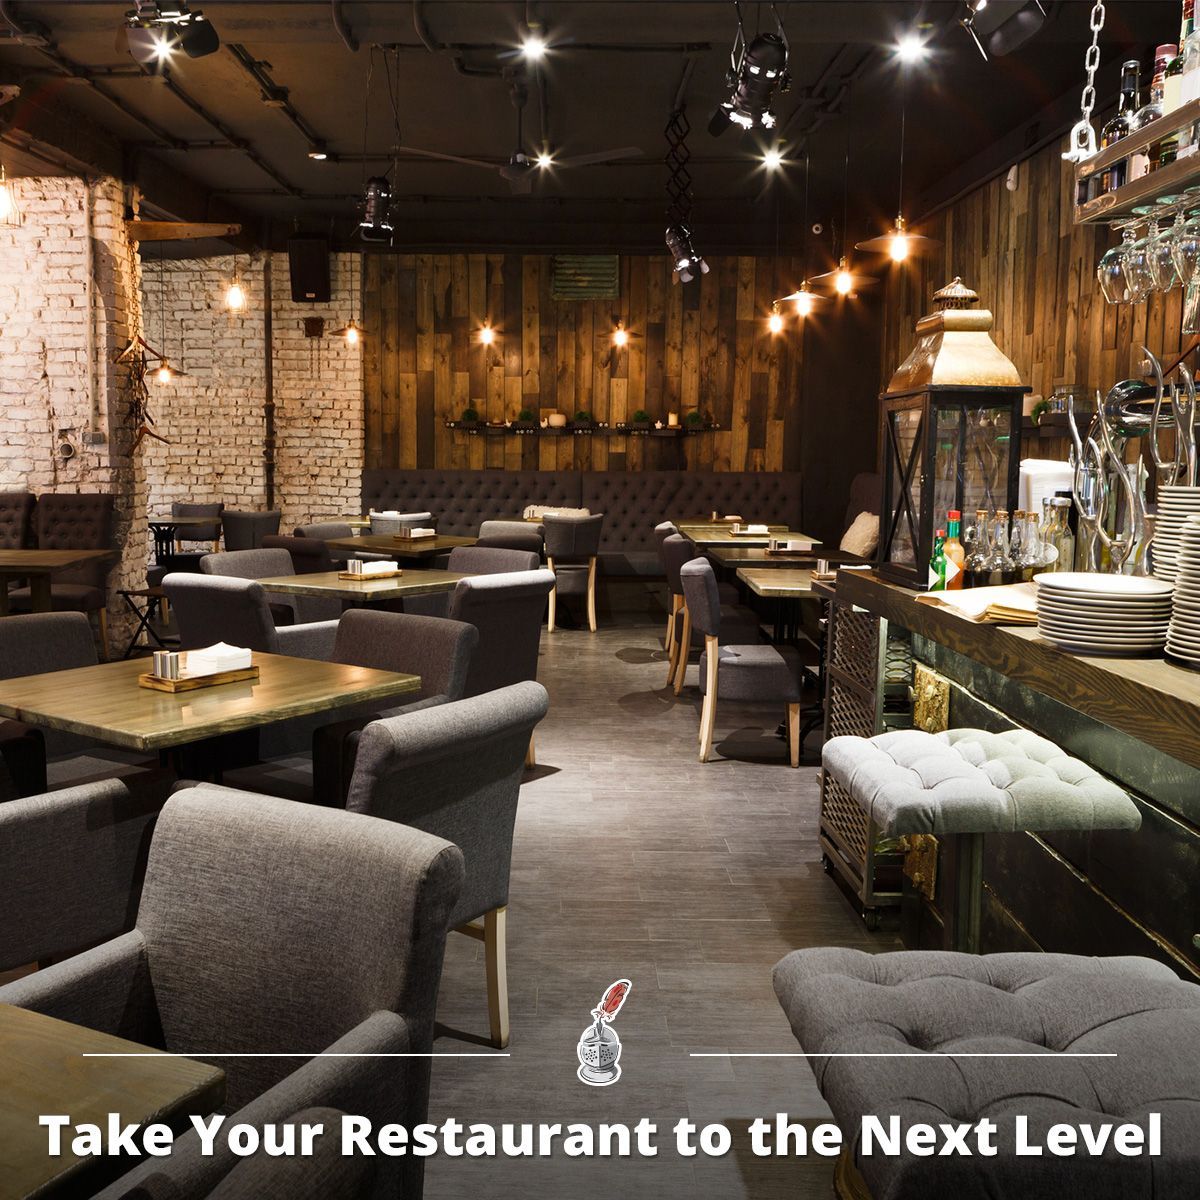 Take Your Restaurant to the Next Level